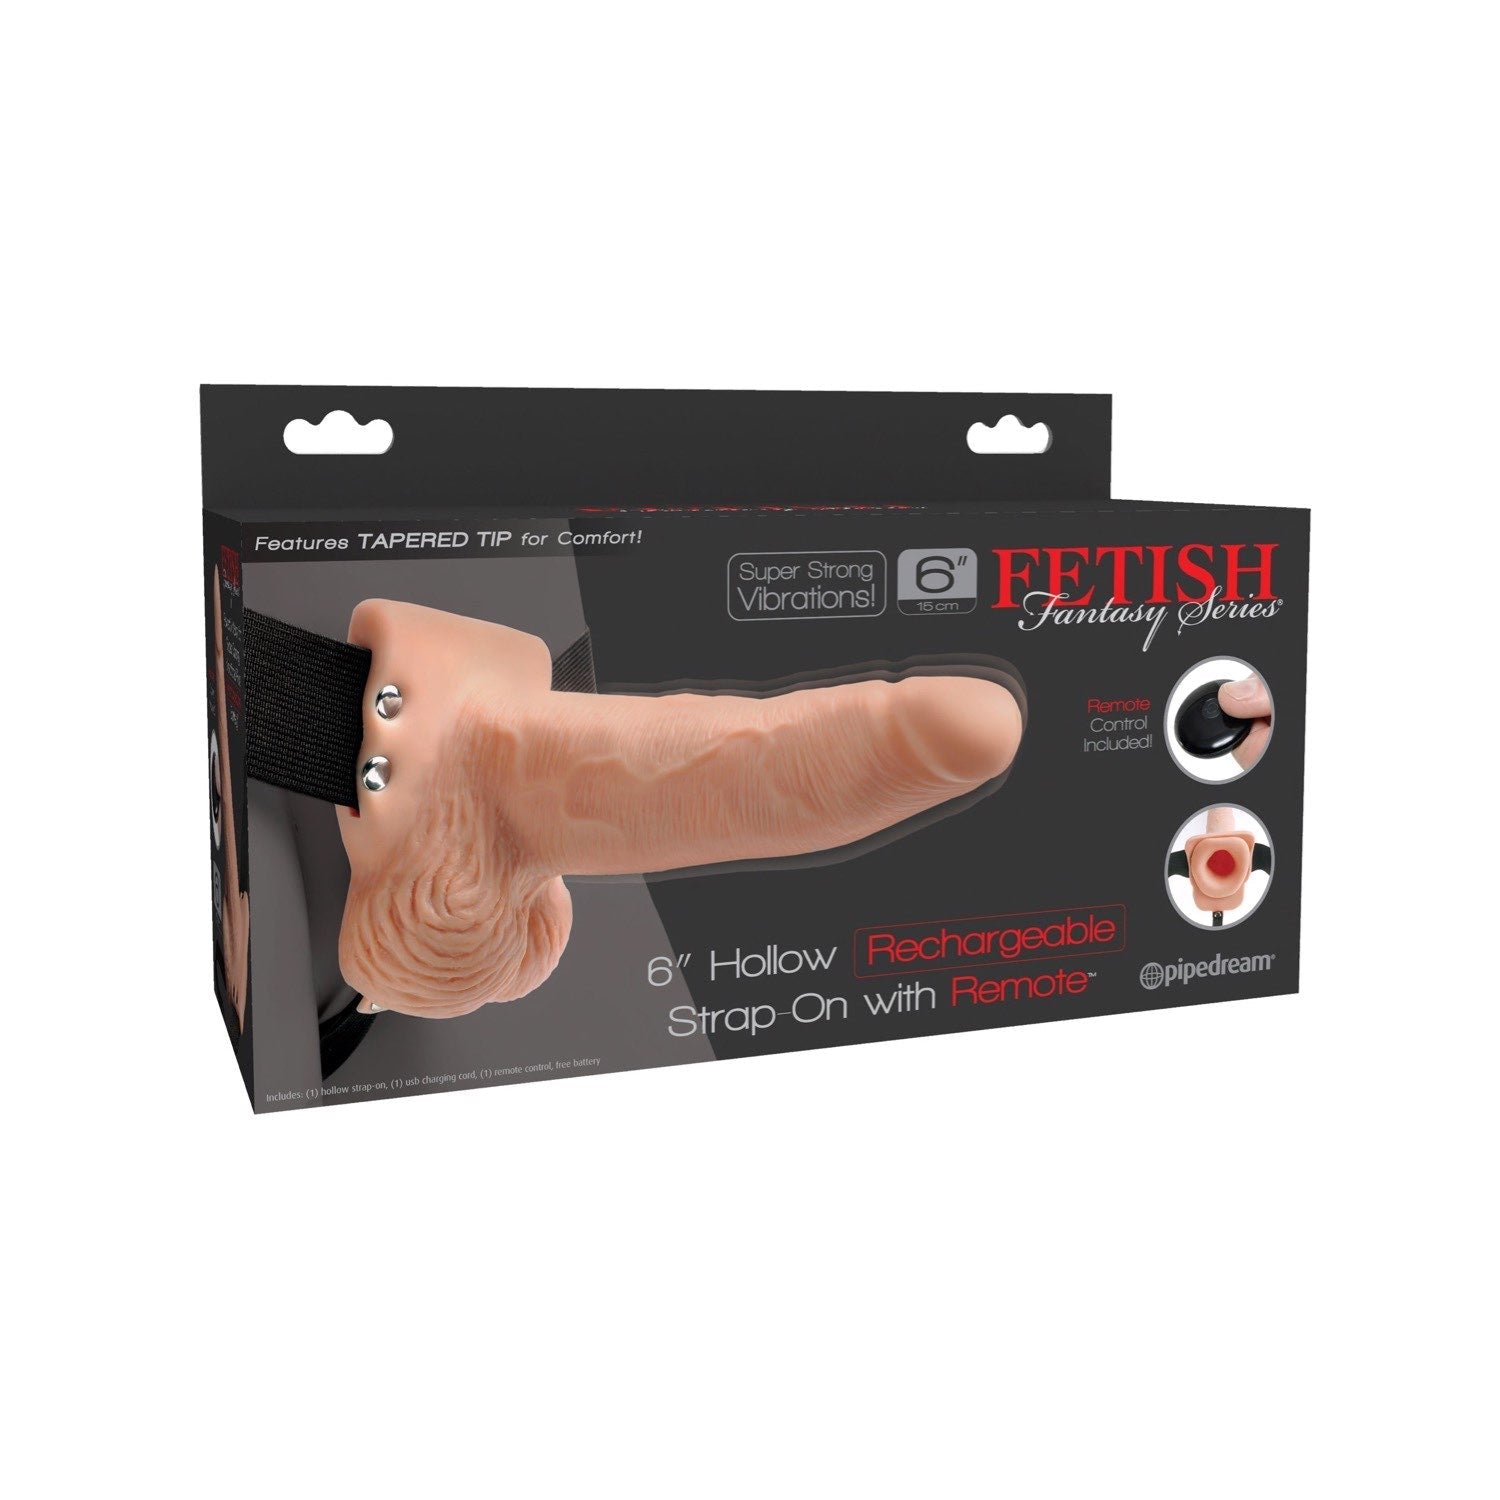 Fetish Fantasy Series 6&quot; Hollow Rechargeable Strap-On with Remote - Flesh 15.2 cm Vibrating Hollow Strap-On by Pipedream